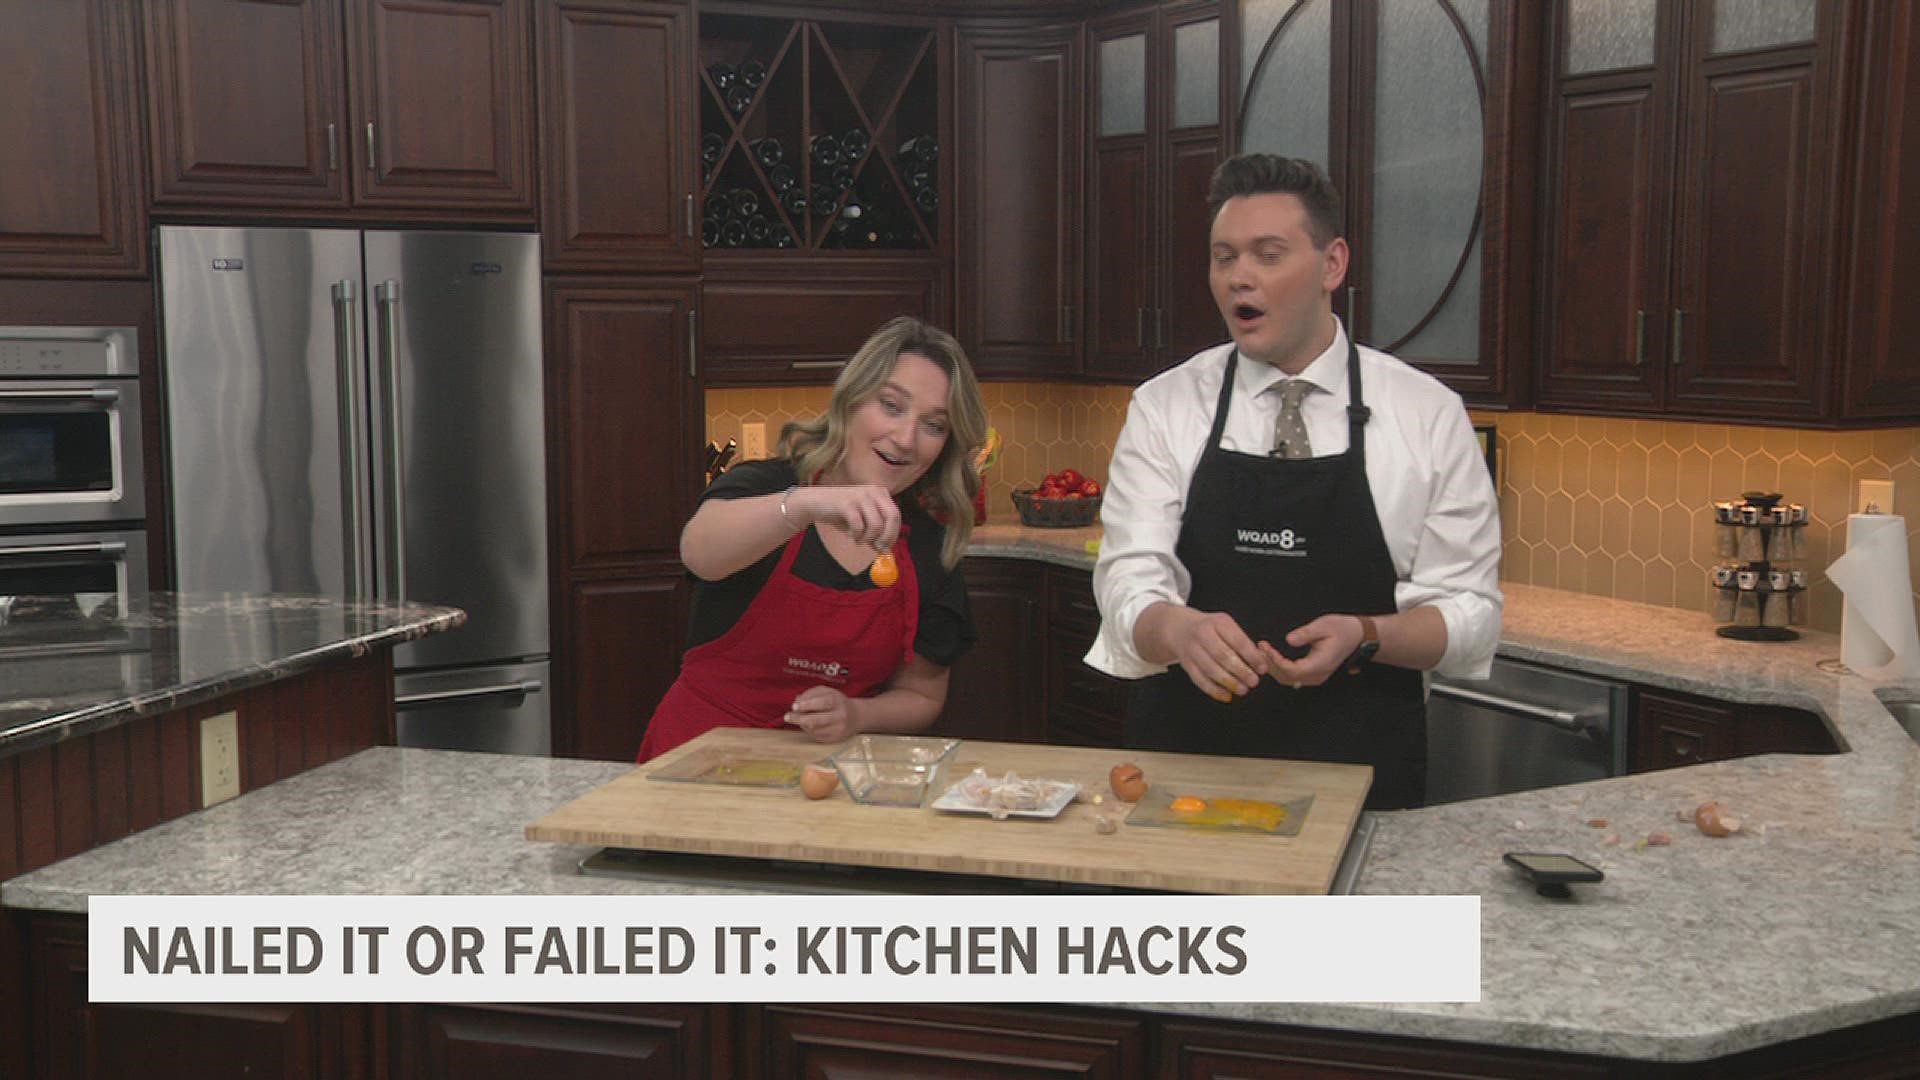 David and Morgan try a kitchen hack by using garlic to separate egg yolks